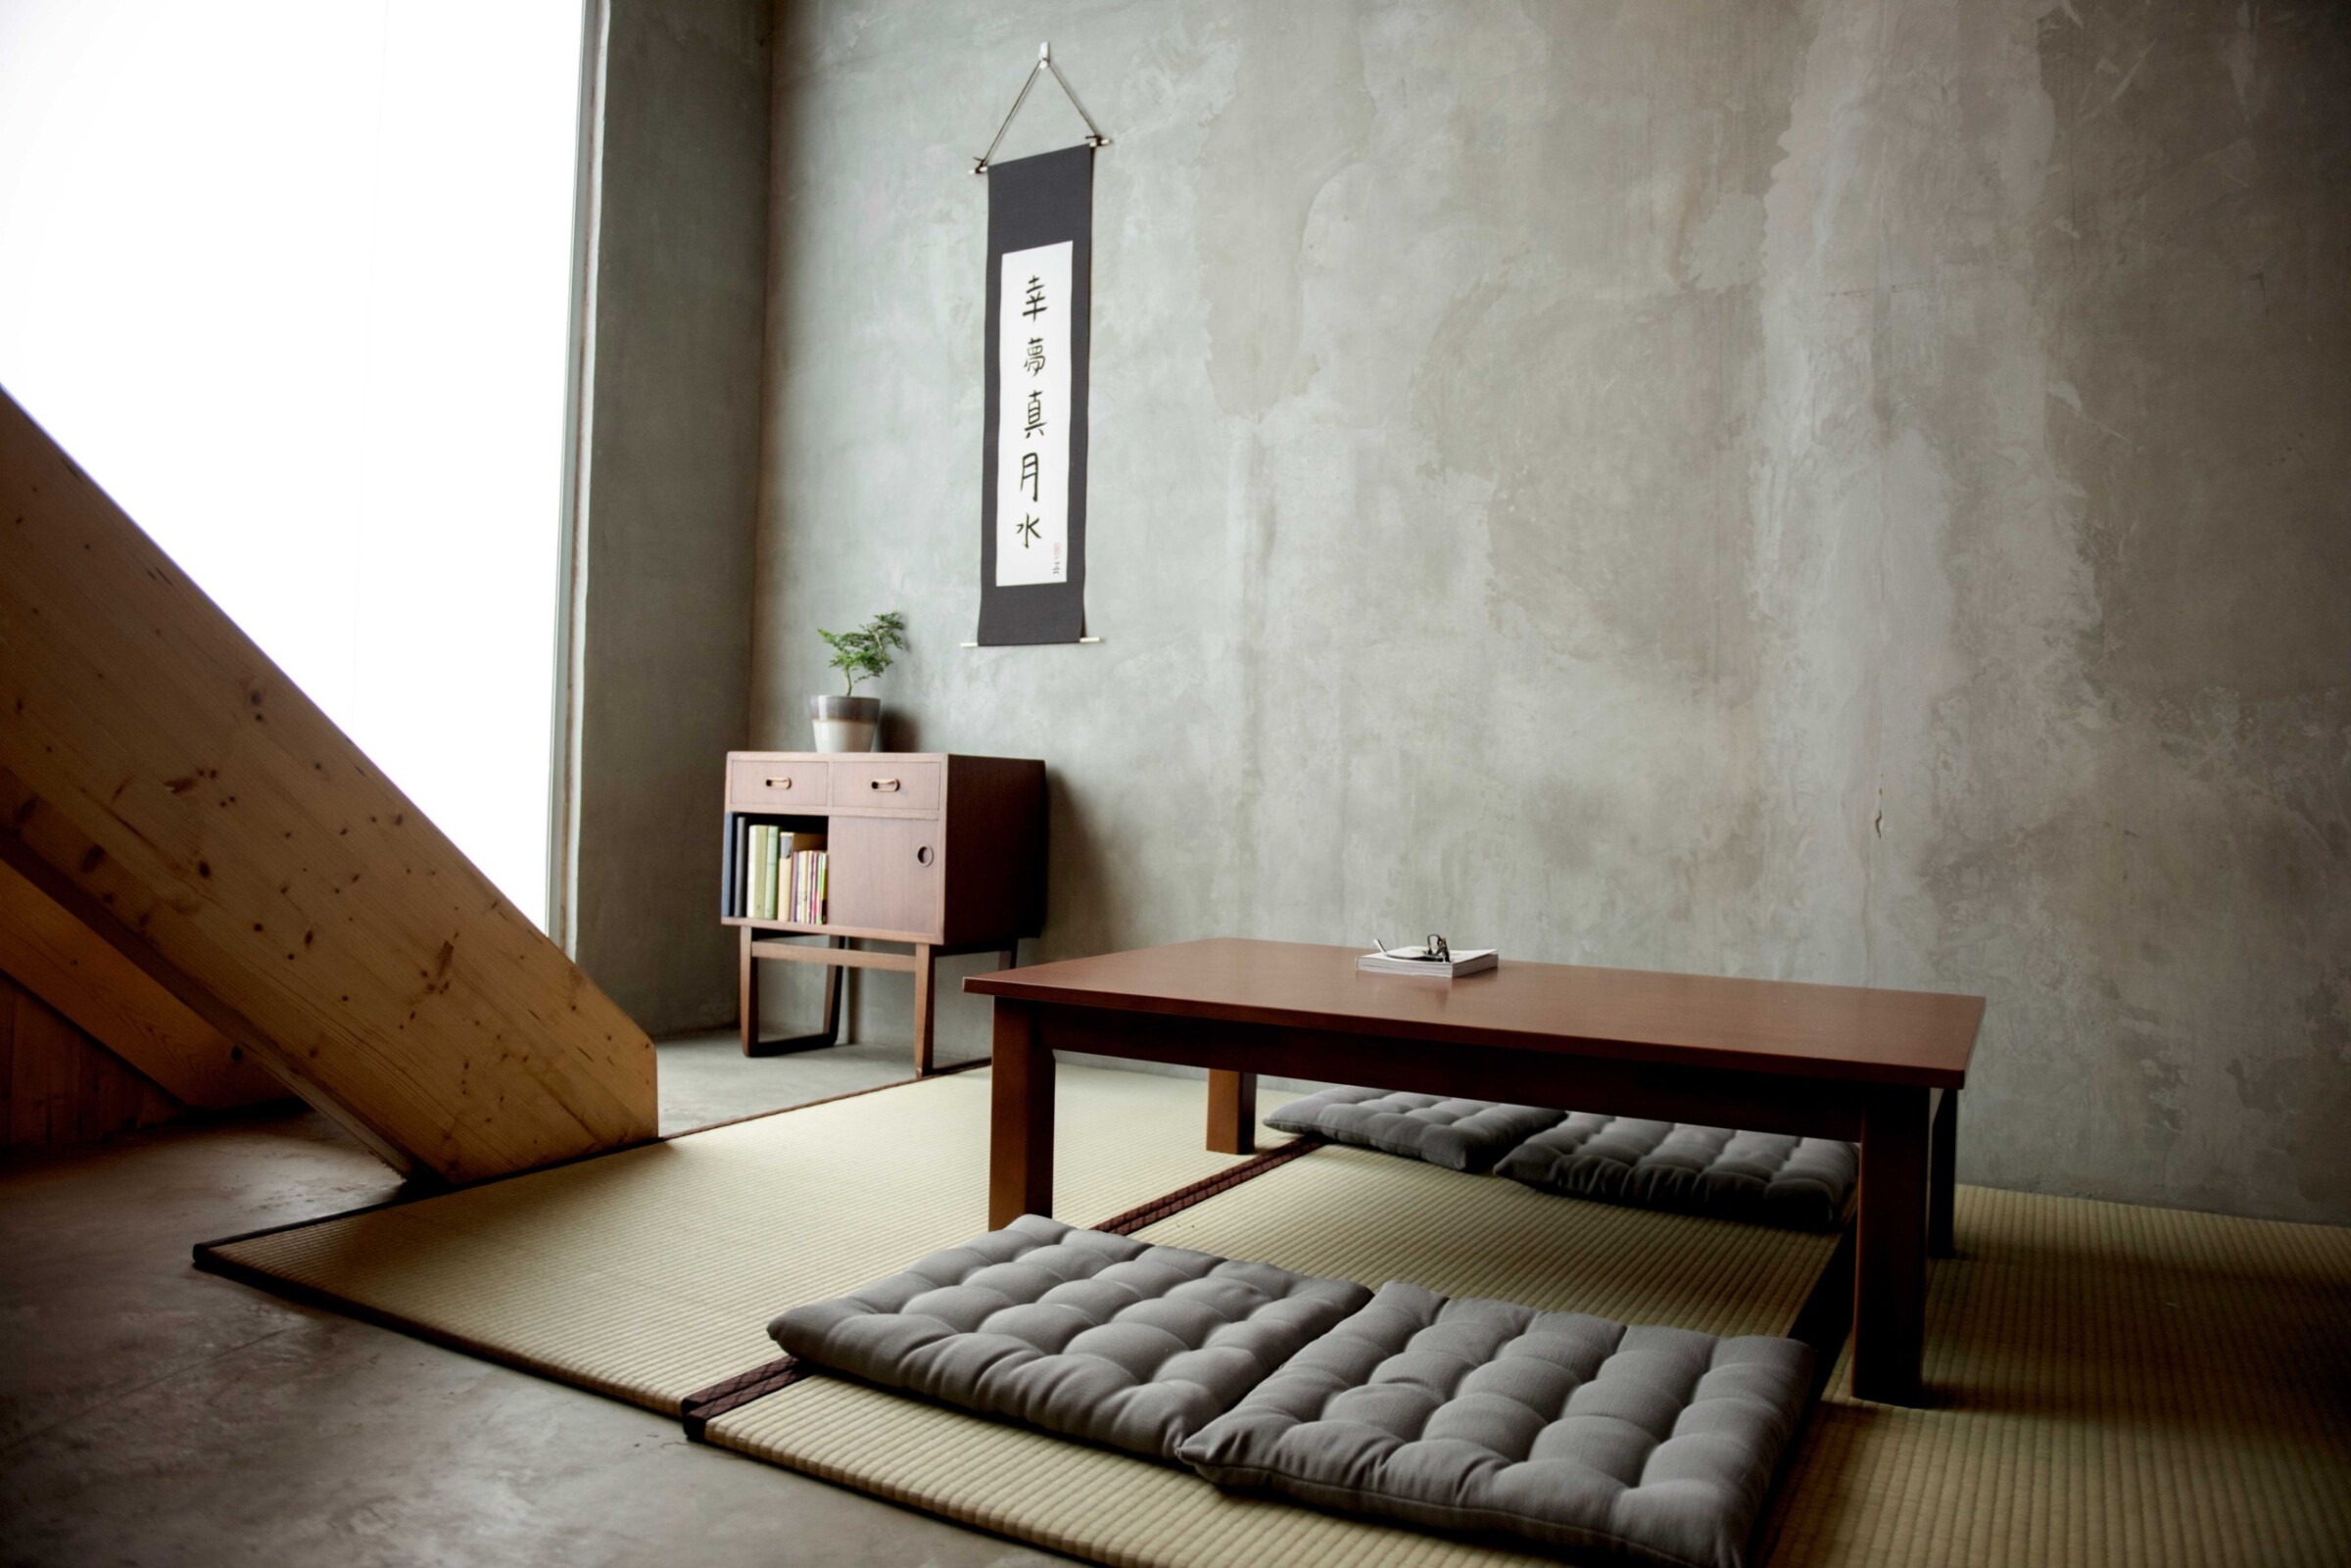 The floor is always covered with the tatami mats, on which most Japanese spend most of their daily domestic lives.